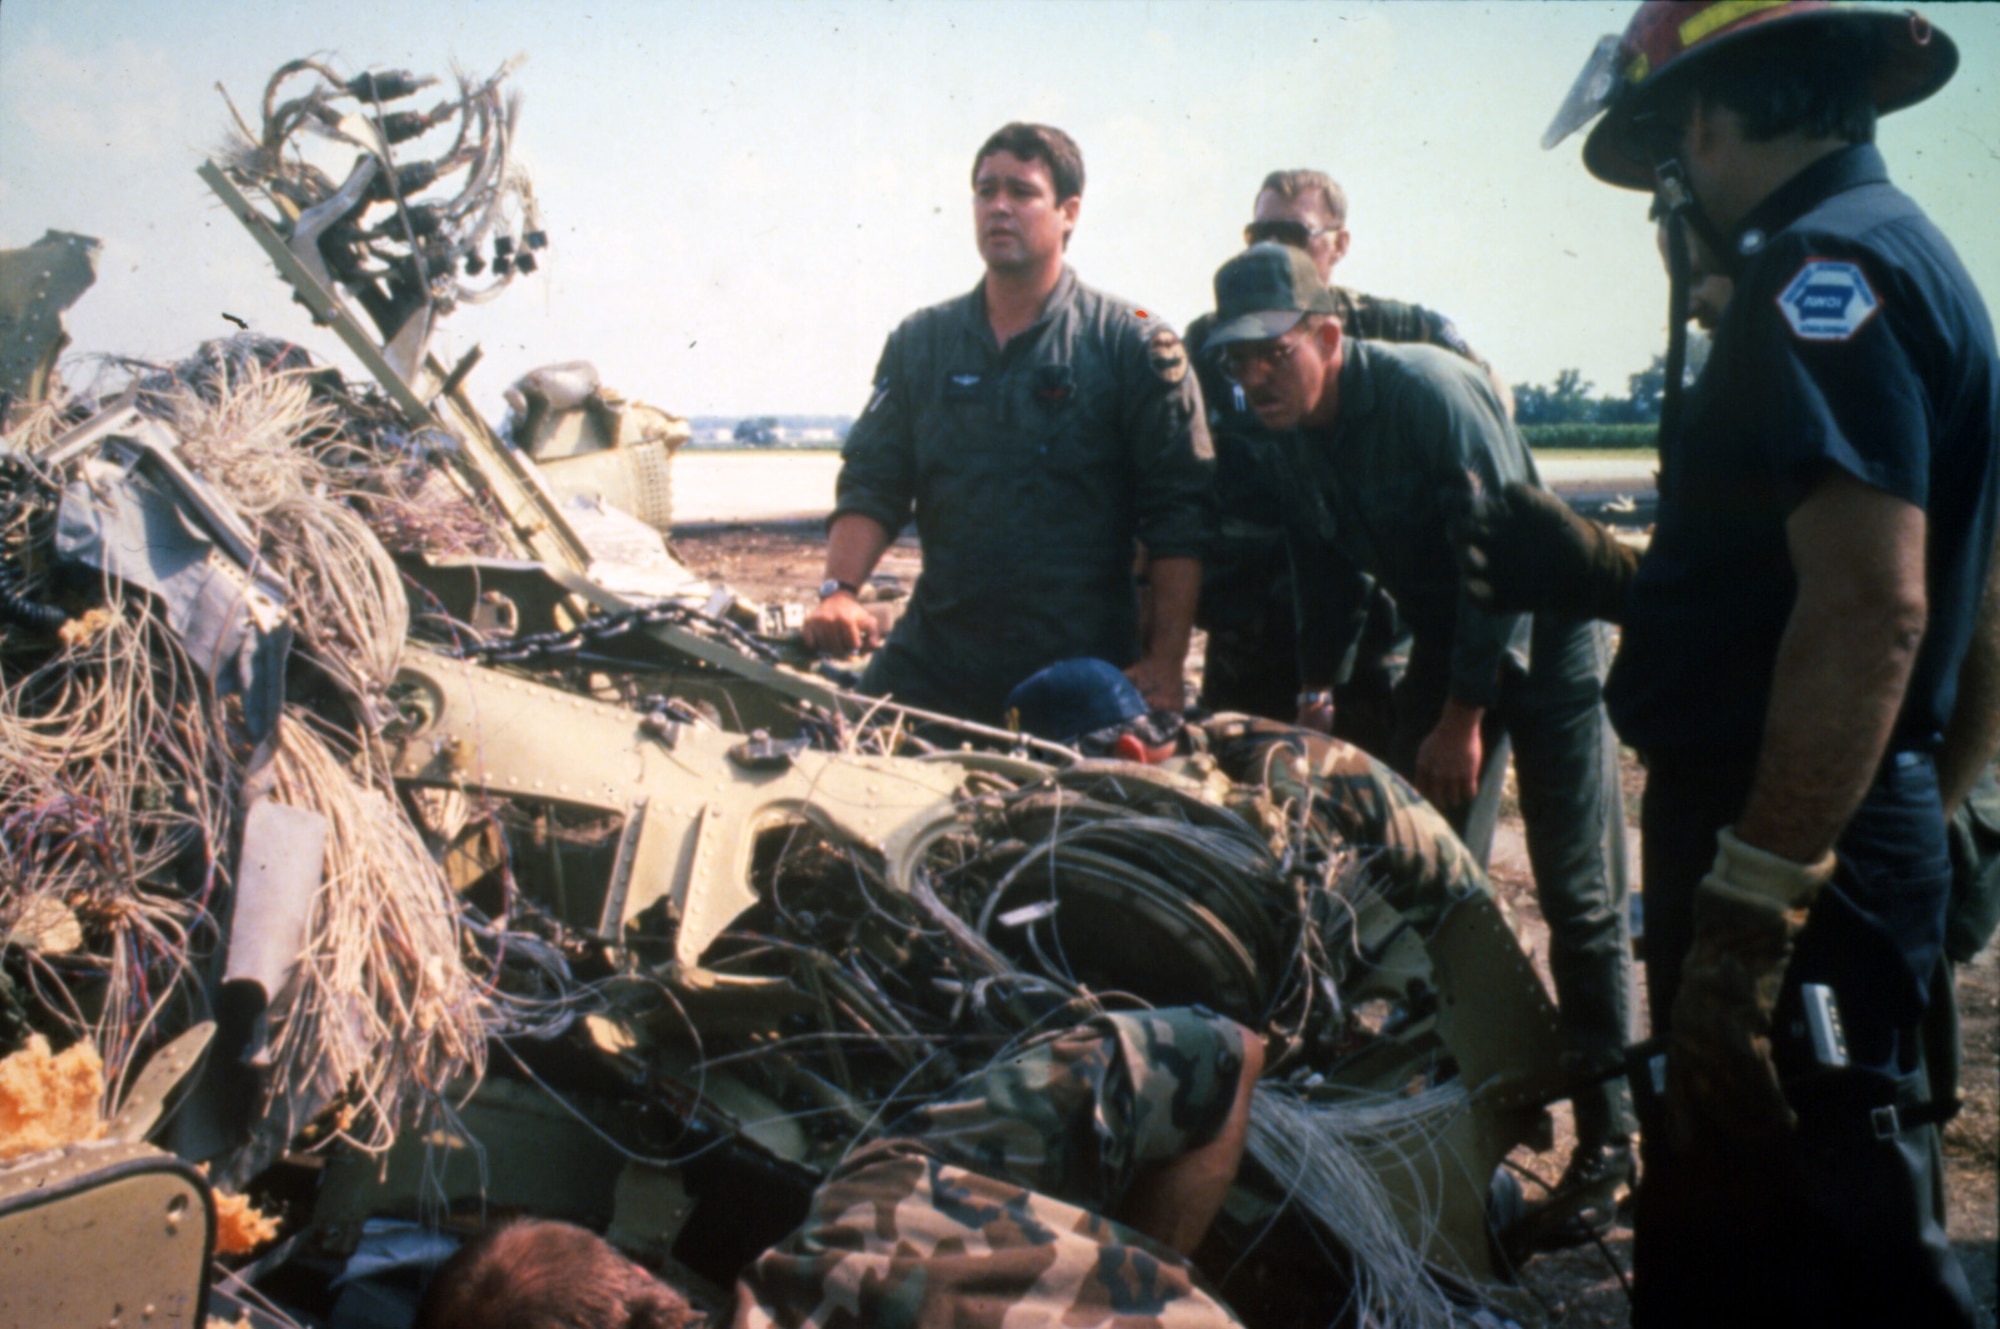 On July 19, 1989 United Flight 232 crashed in Sioux City, Iowa with 285 souls on board. Members of the Iowa Air National Guard’s 185th Fighter Squadron, now the 185th Air Refueling Wing, responded to the crash to help save lives. (Air National Guard photo/Released)